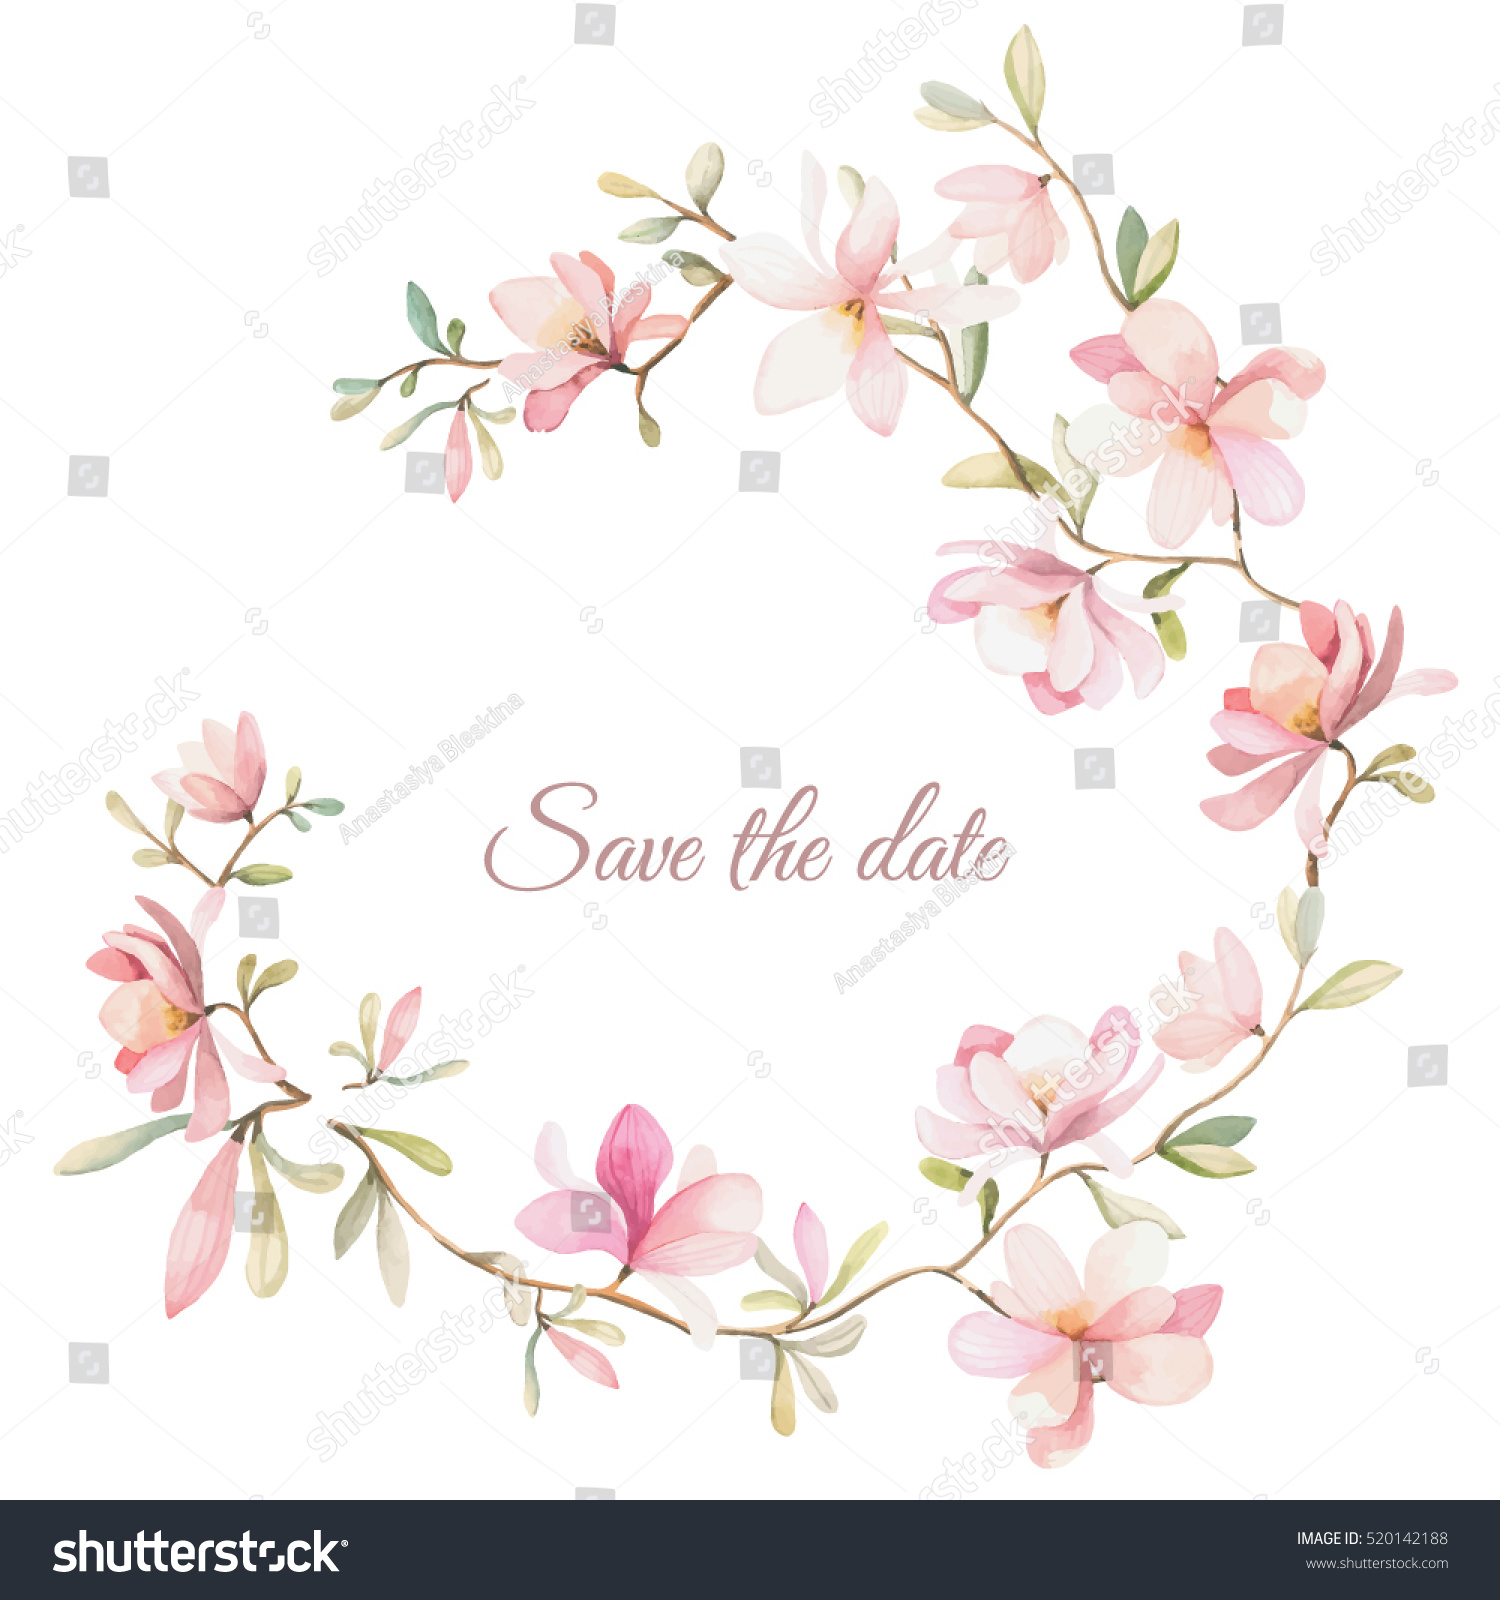 wreath of flowers in watercolor style with white background #520142188